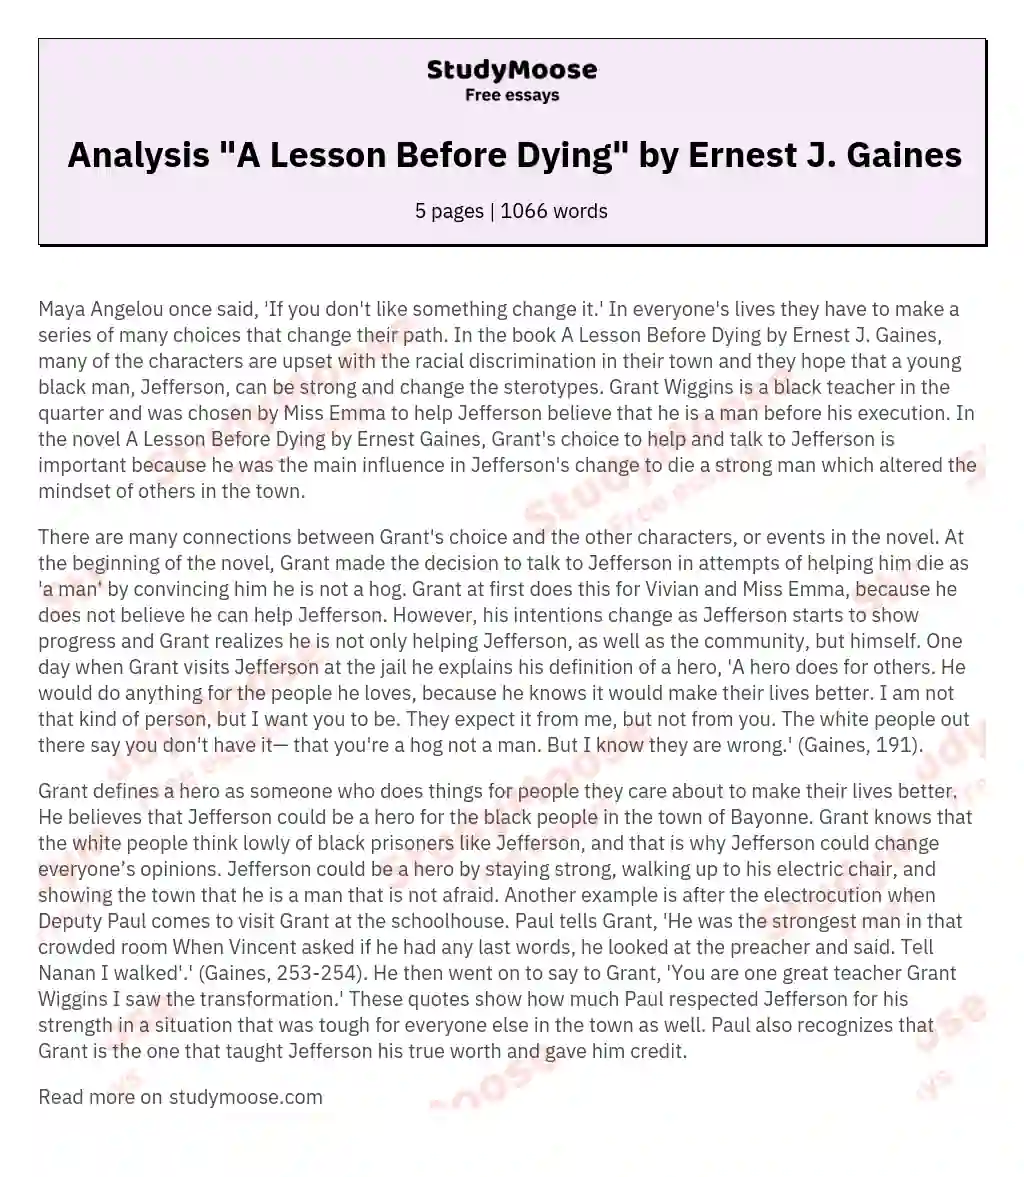 Analysis "A Lesson Before Dying" by Ernest J. Gaines essay